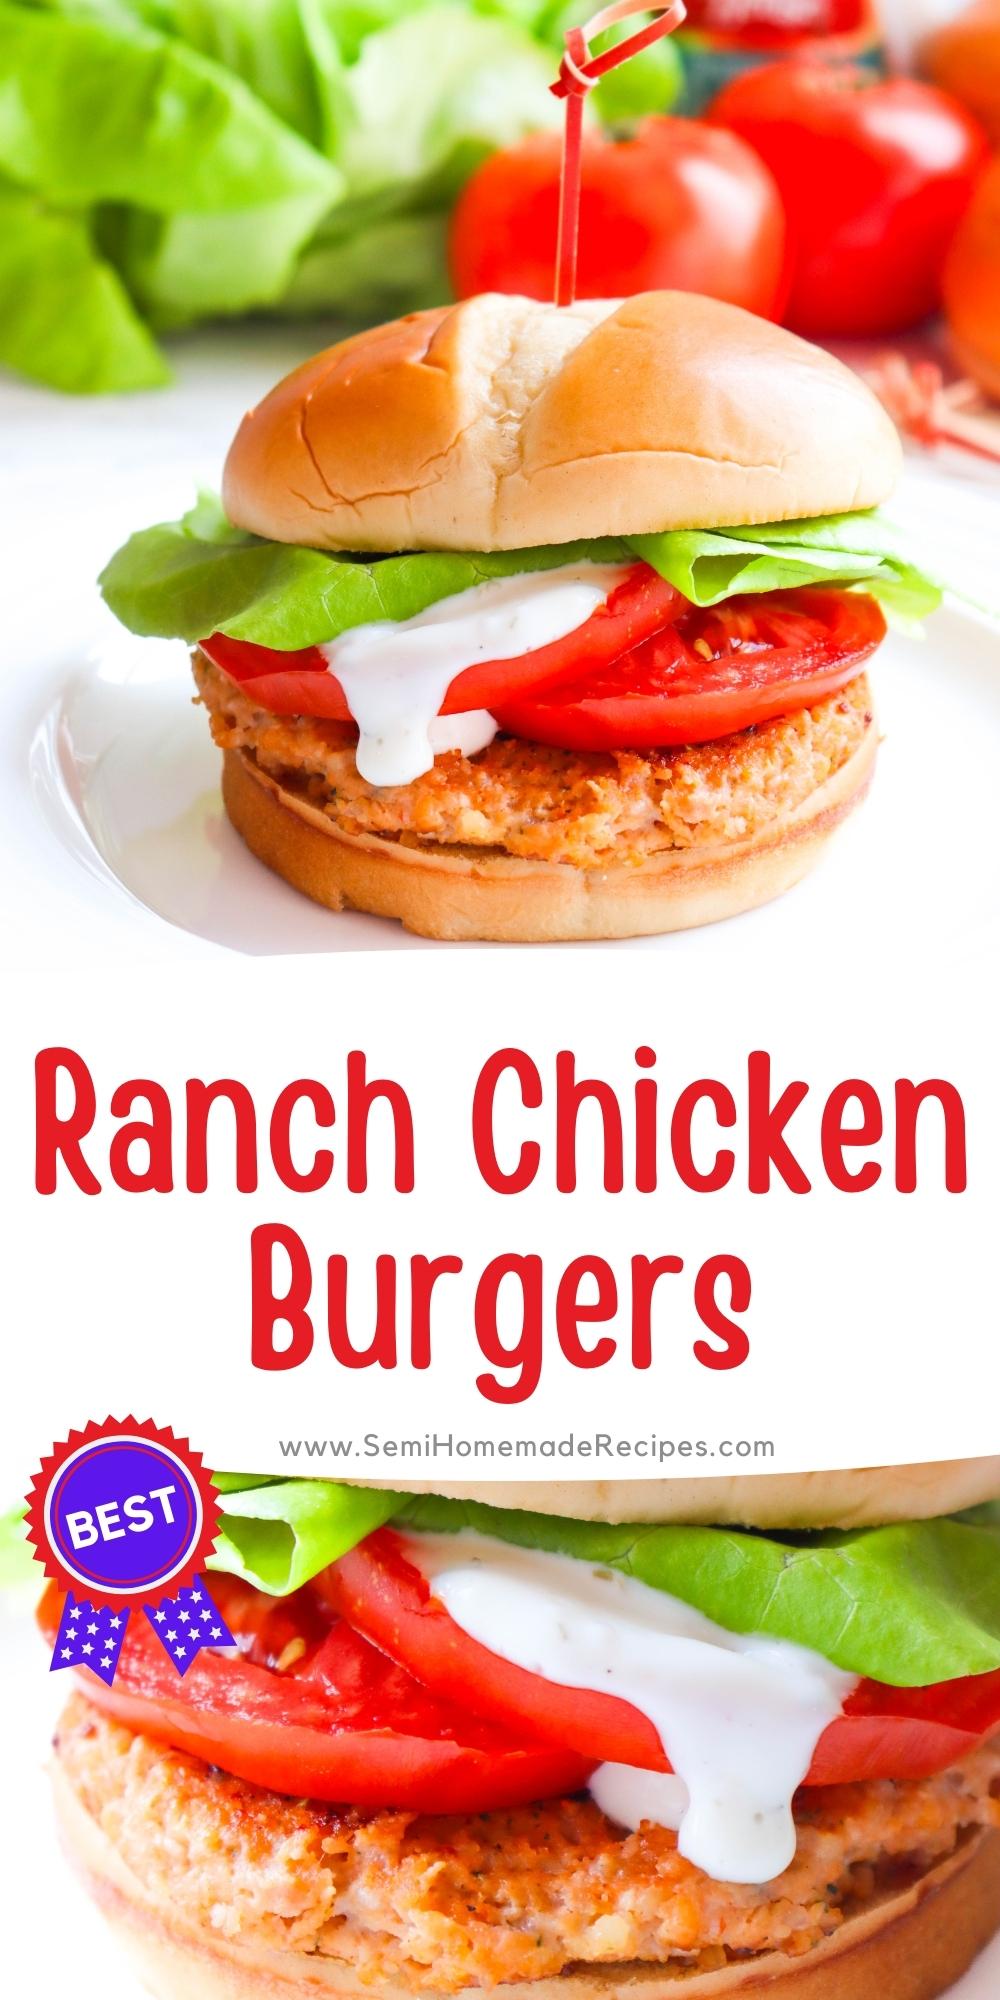 Get ready for a match made in burger heaven! Chicken Burger heaven that is! Ranch meets chicken in this ultimate burger combo that will leave your taste buds super happy! 